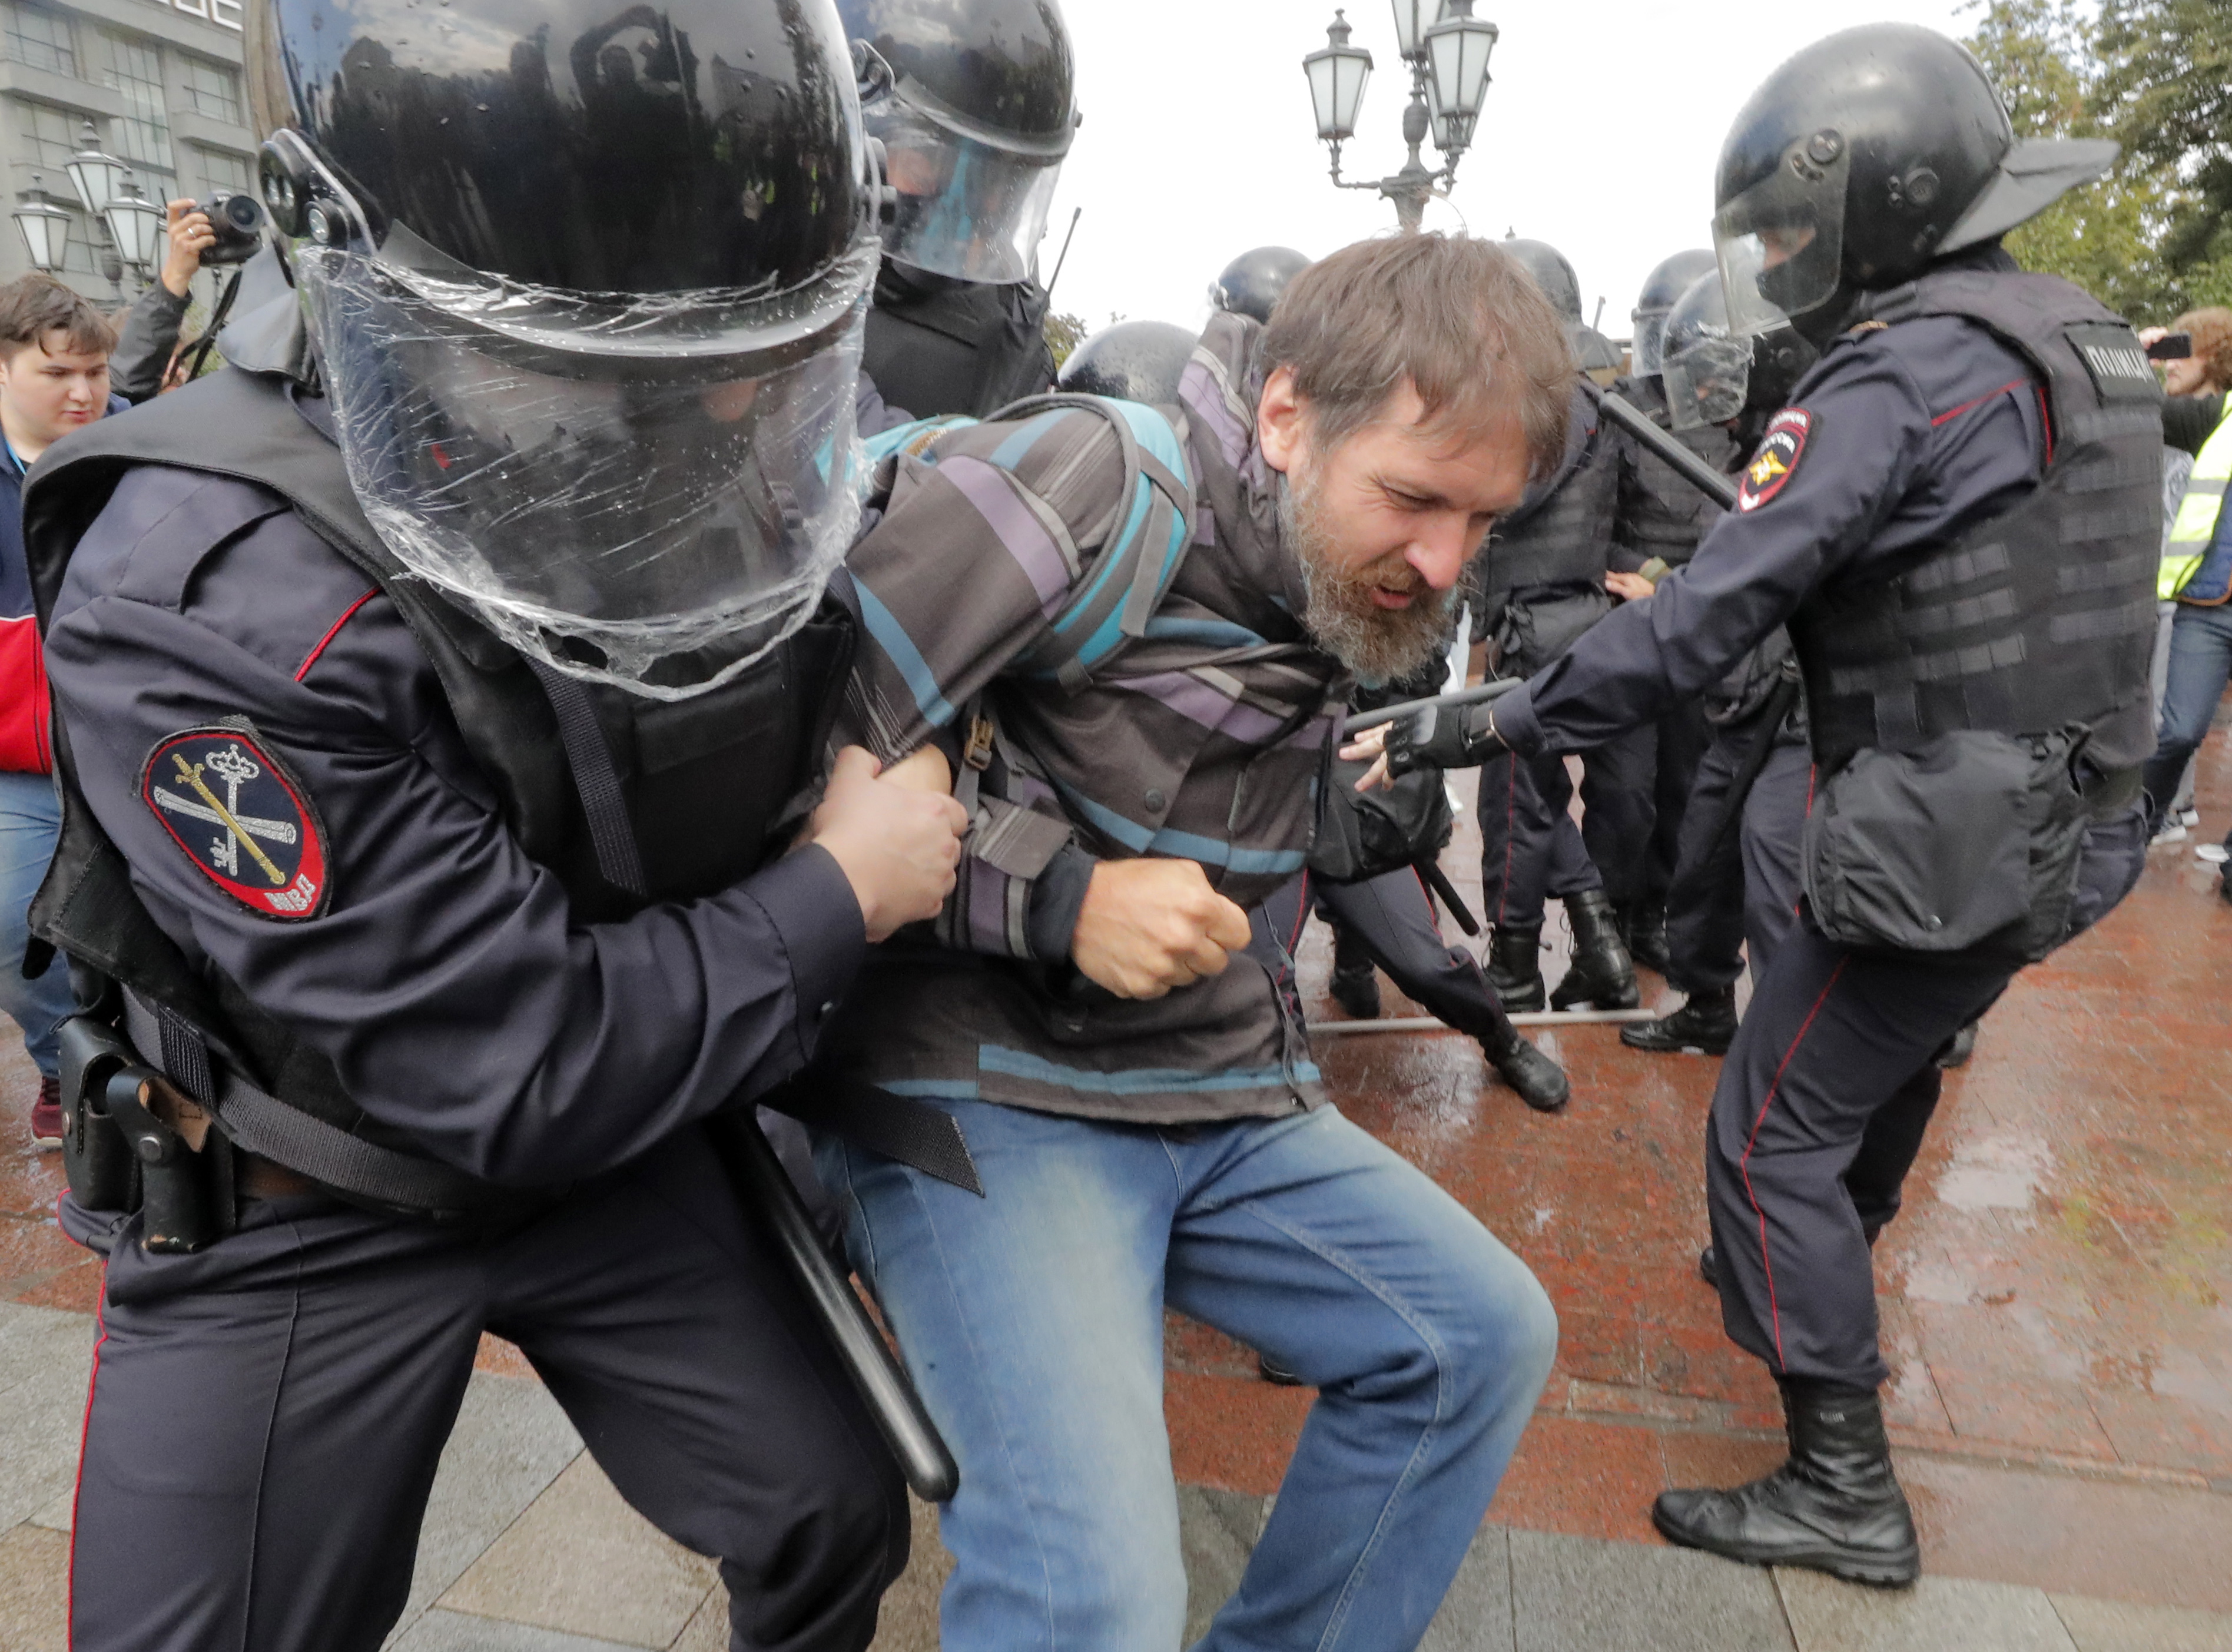 epa07754983 Russian riot police fight with resisting detained participant of liberal opposition protest action in the center of Moscow, Russia, 03 August 2019. Liberal opposition called their supporters to continue their protest actions against rejecting their candidates for Moscow City Duma elections, which is scheuled for 08 September. Most of the candidates have been placed on administrative arrest before and during last week protest action where  about 1,300 participants were detained.  EPA/MAXIM SHIPENKOV